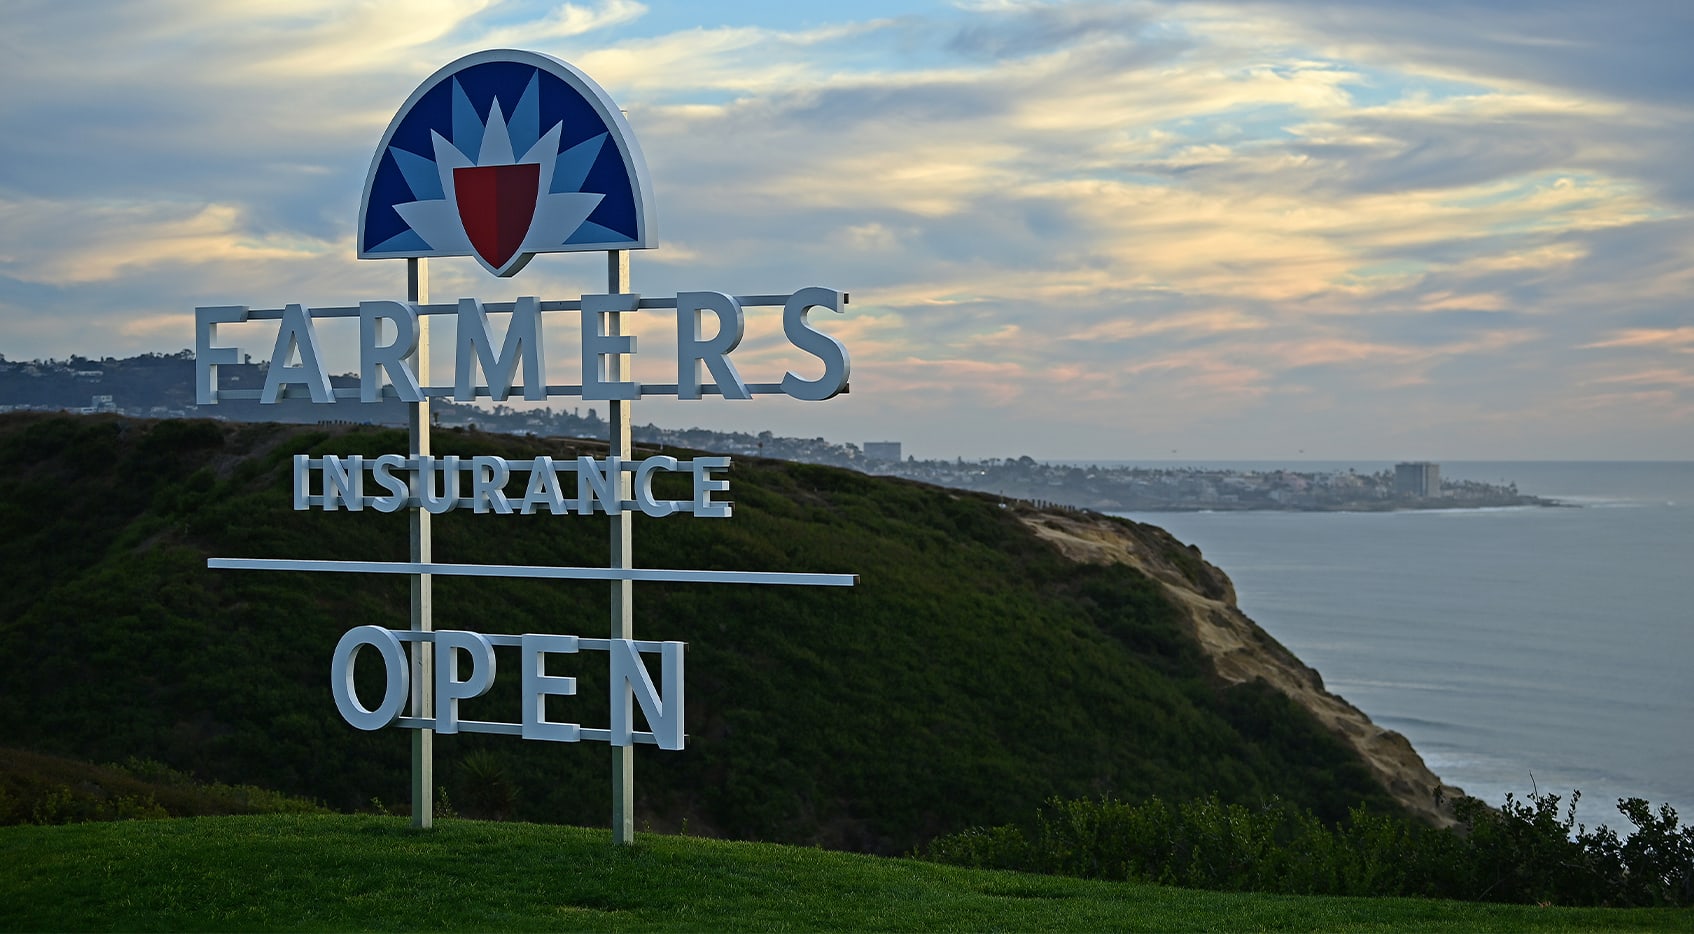 How to watch Farmers Insurance Open, Round 3 Live leaderboard, tee